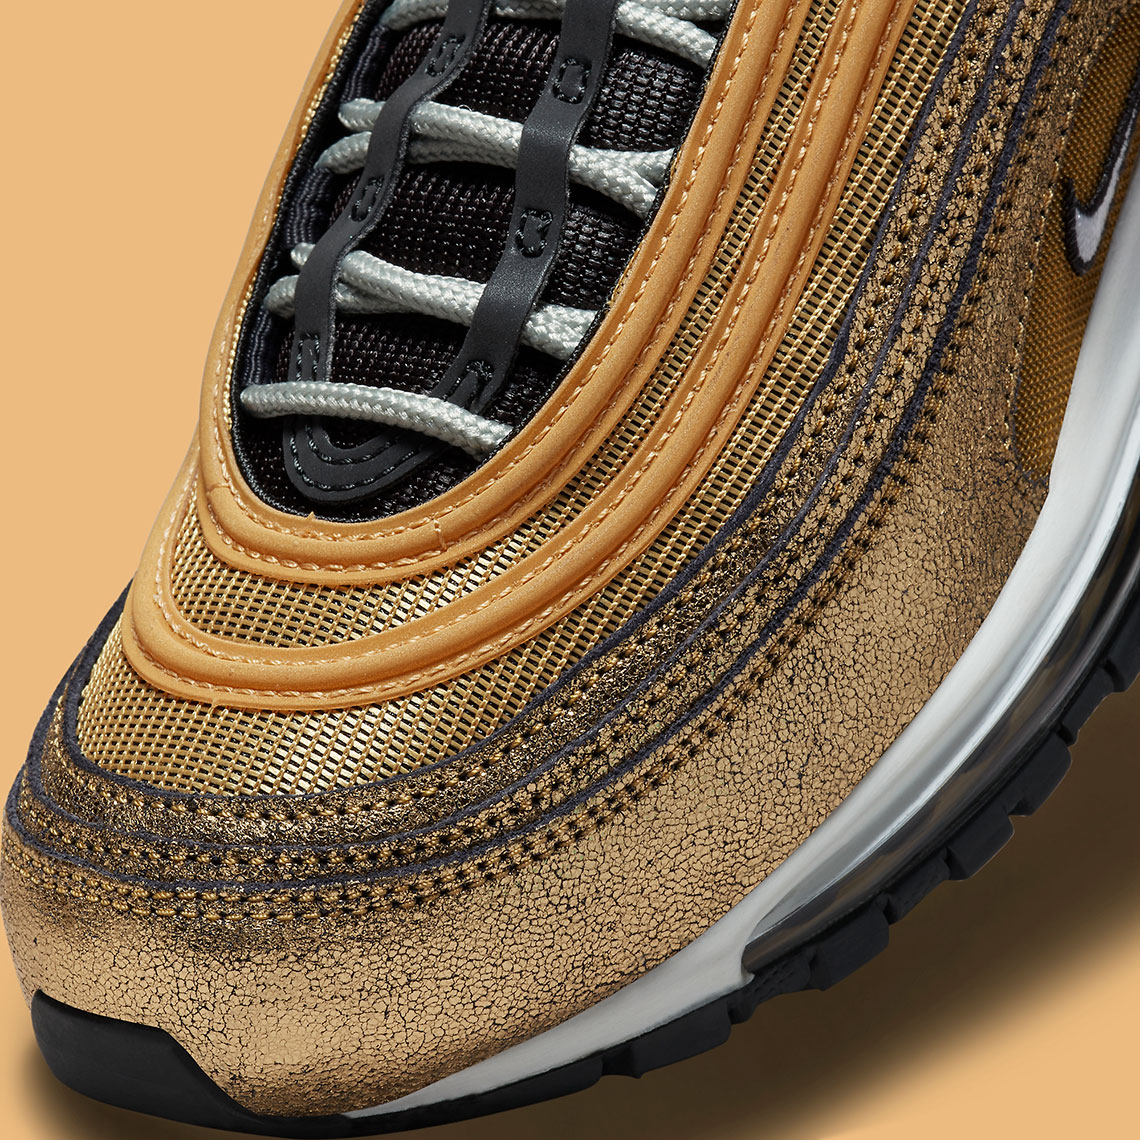 Nike Air Max 97 Cracked Gold Do5881 700 4